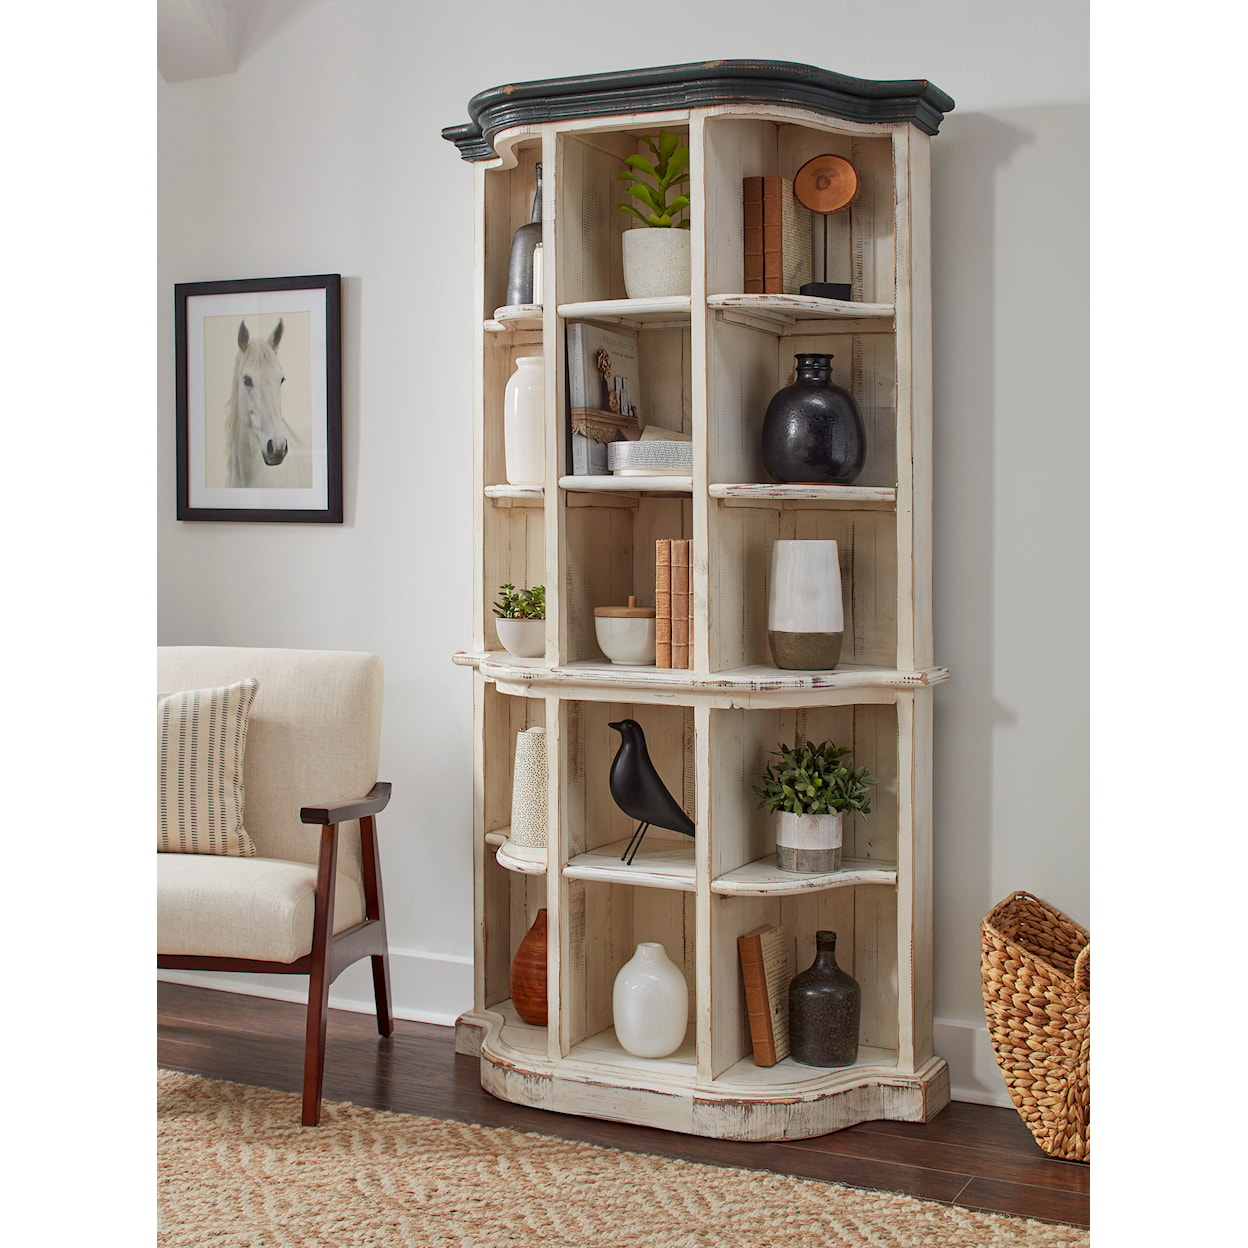 Aspenhome Hinsdale Display Case